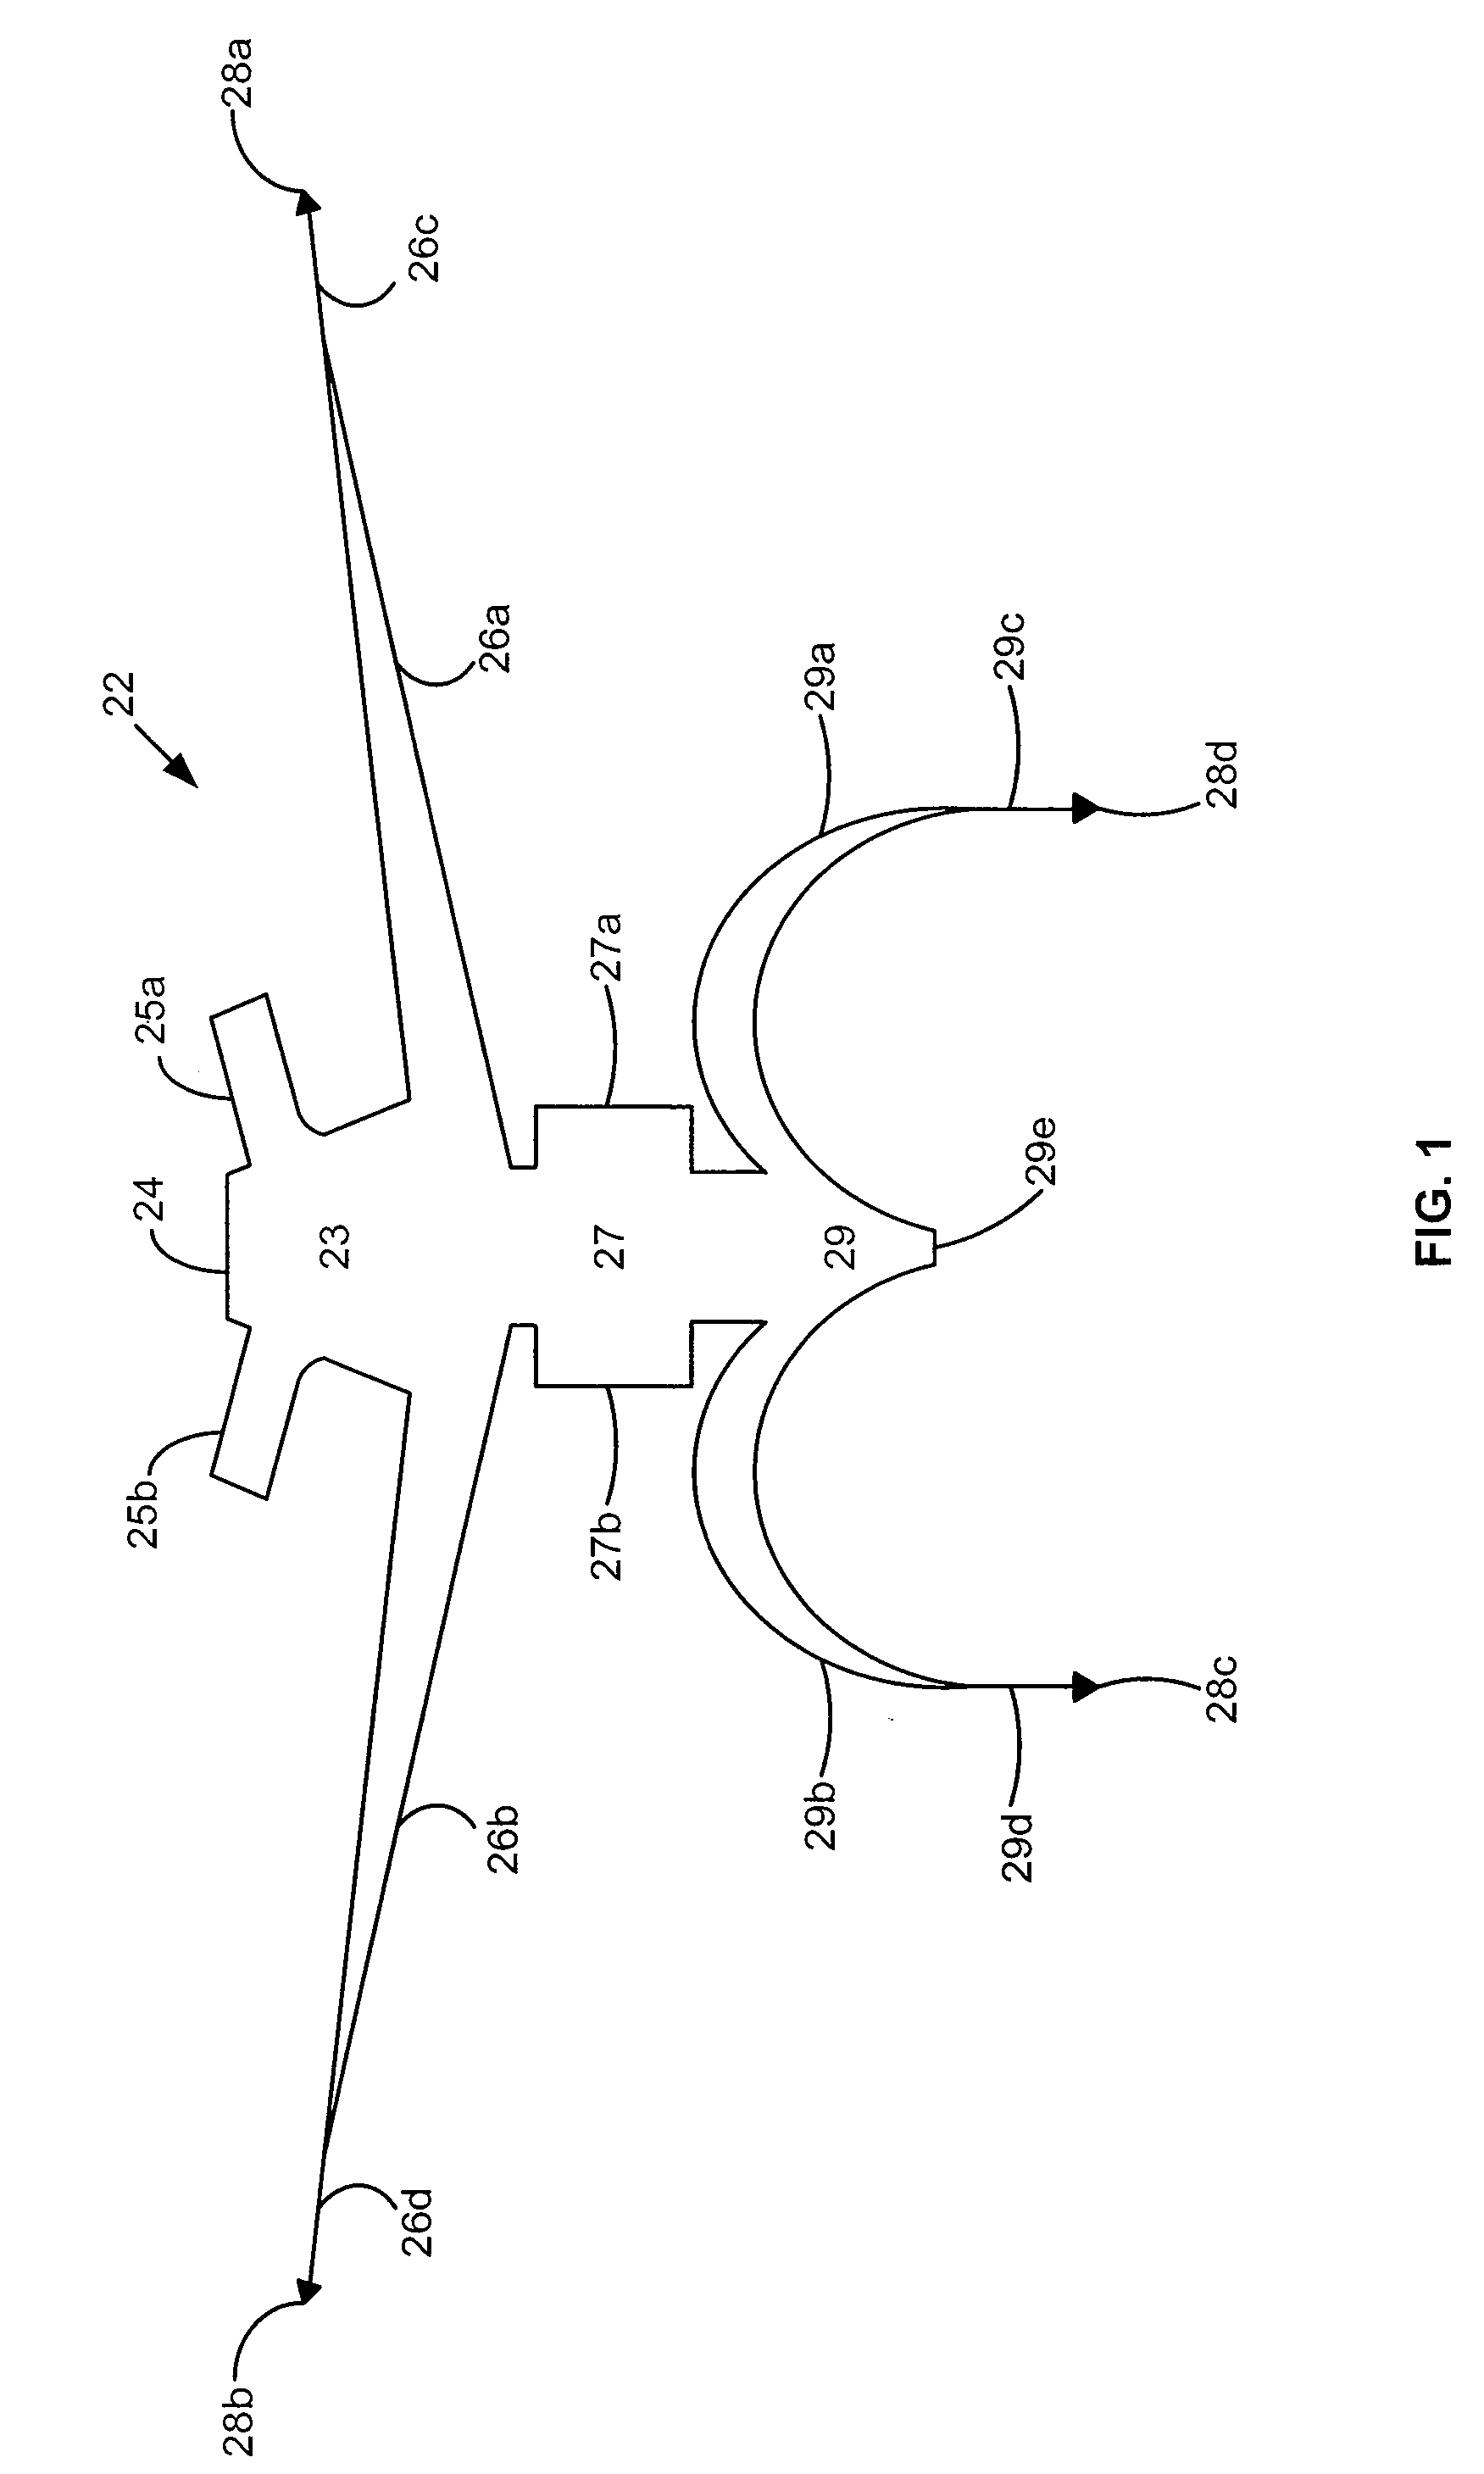 System and Method for Treating Tissue Wall Prolapse